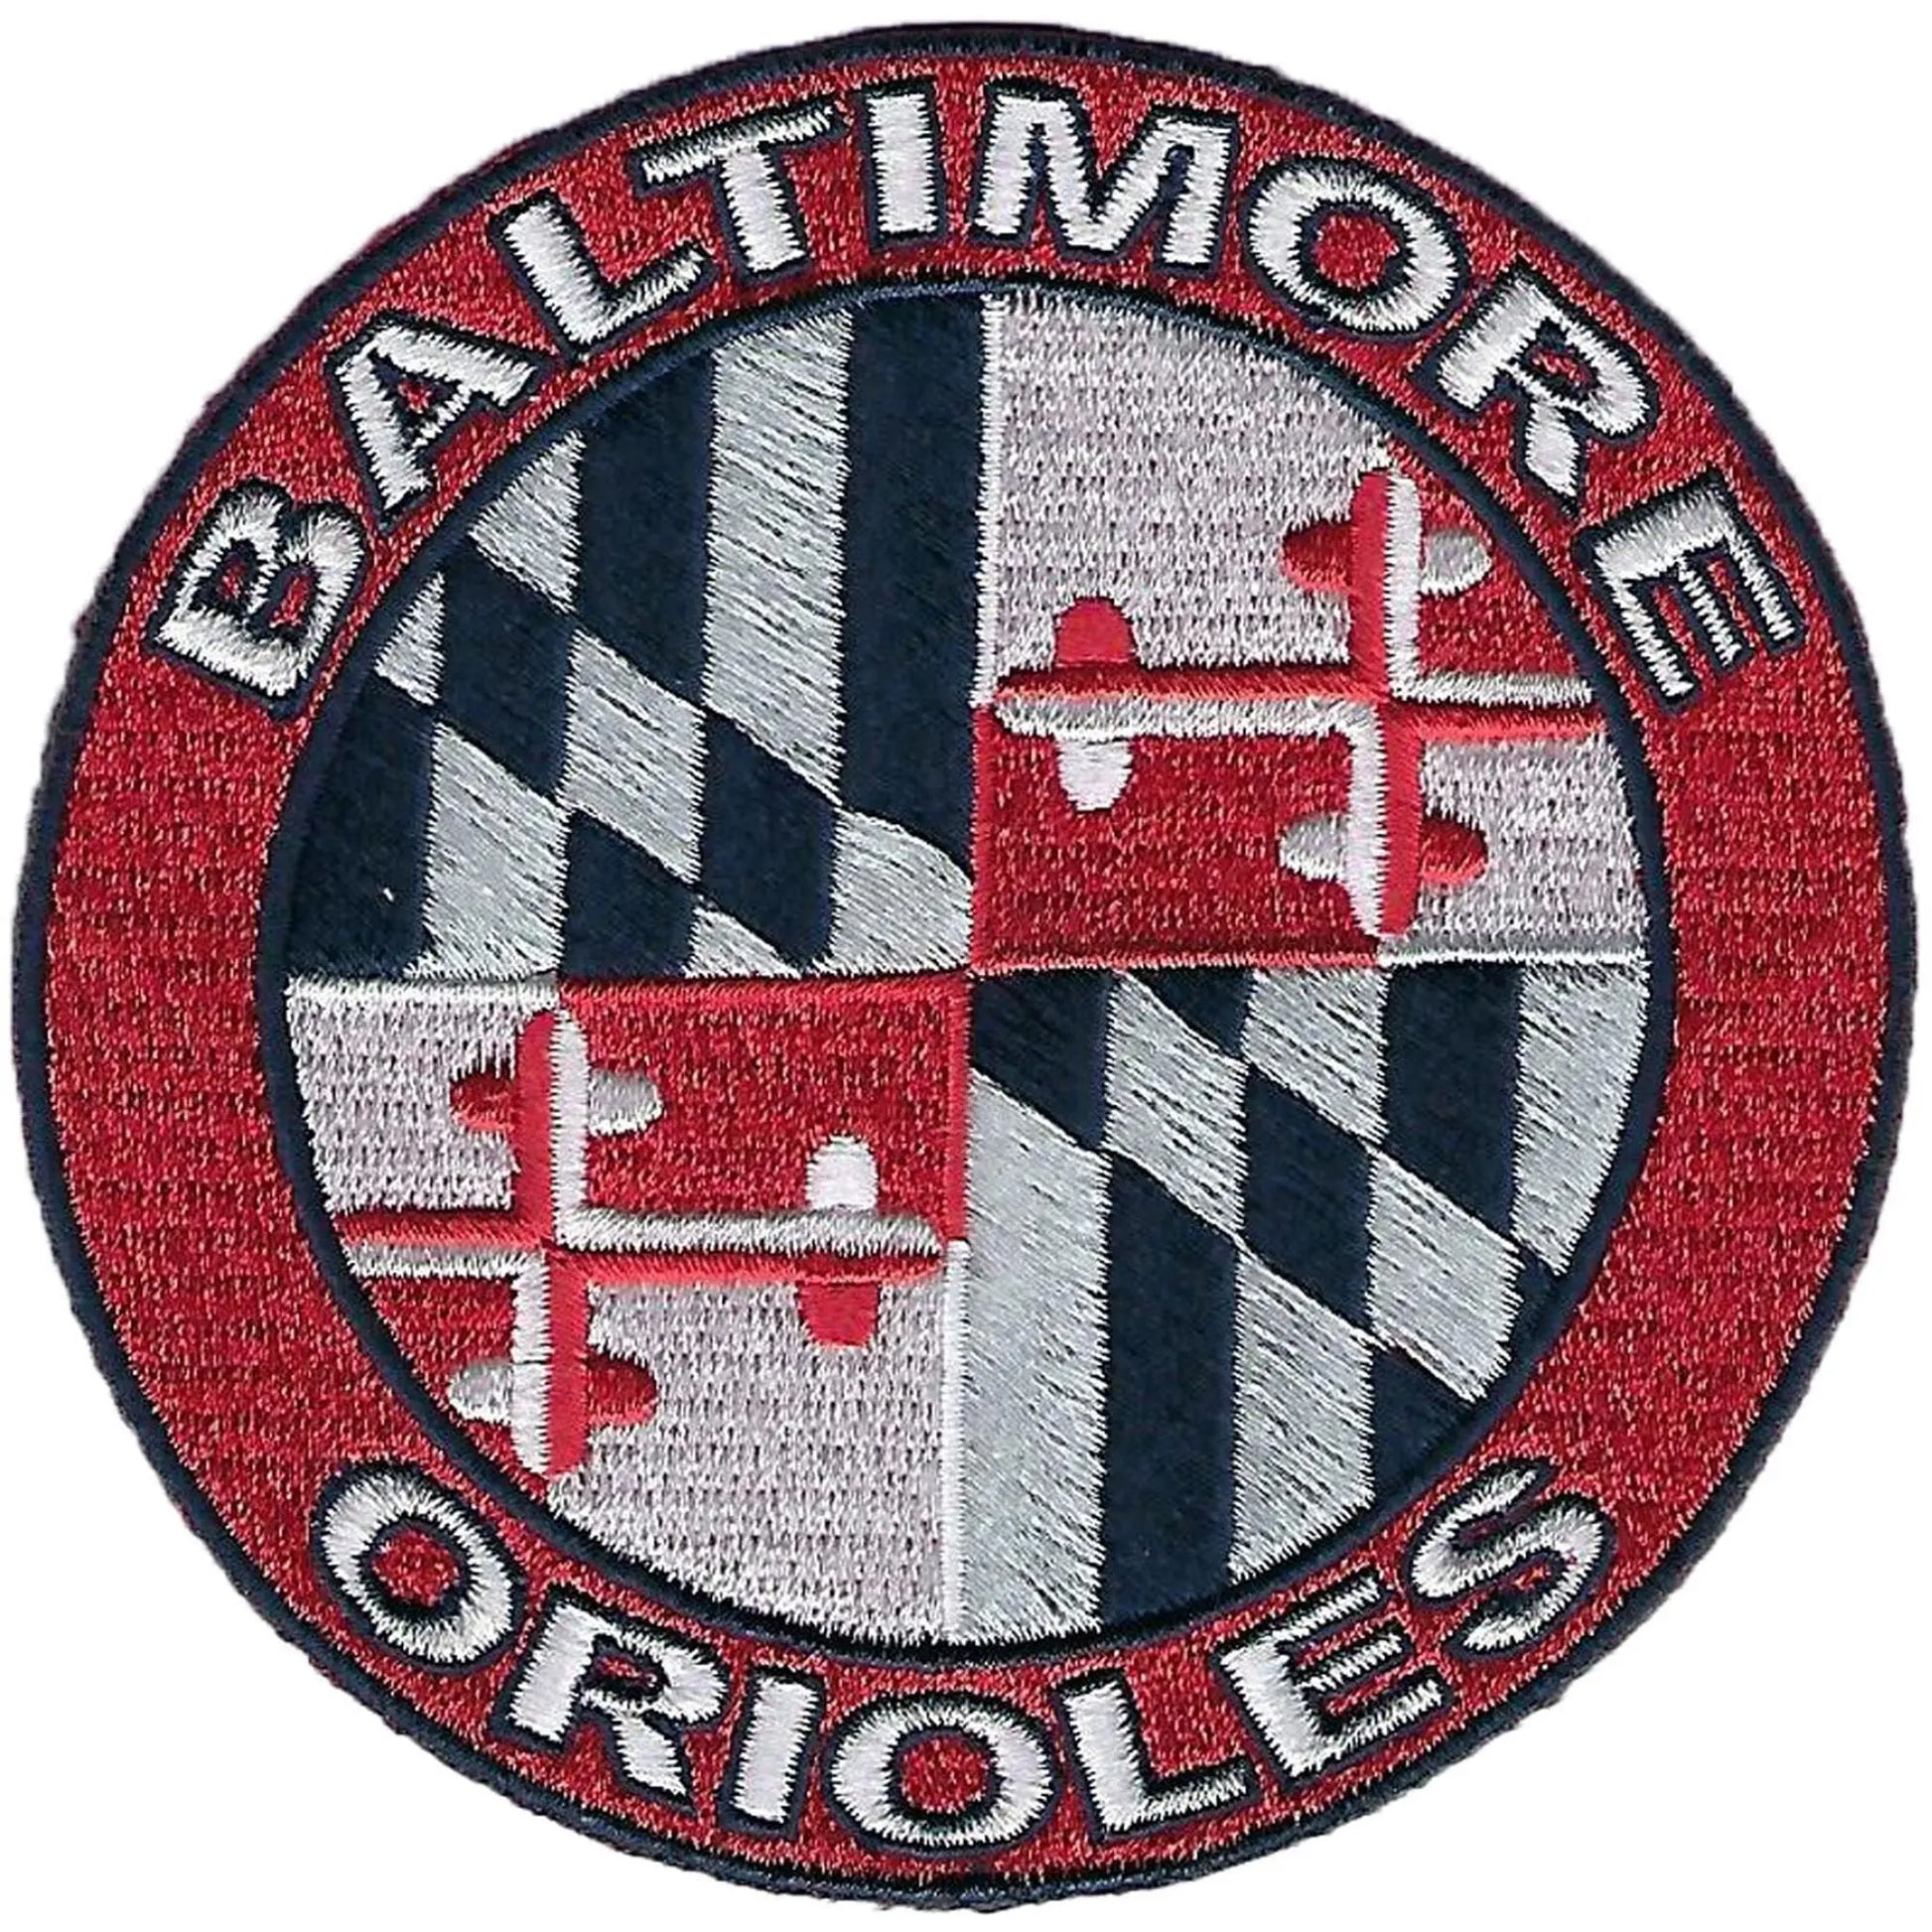 Baltimore Orioles 2018 Stars & Stripes Sleeve Jersey Patch 